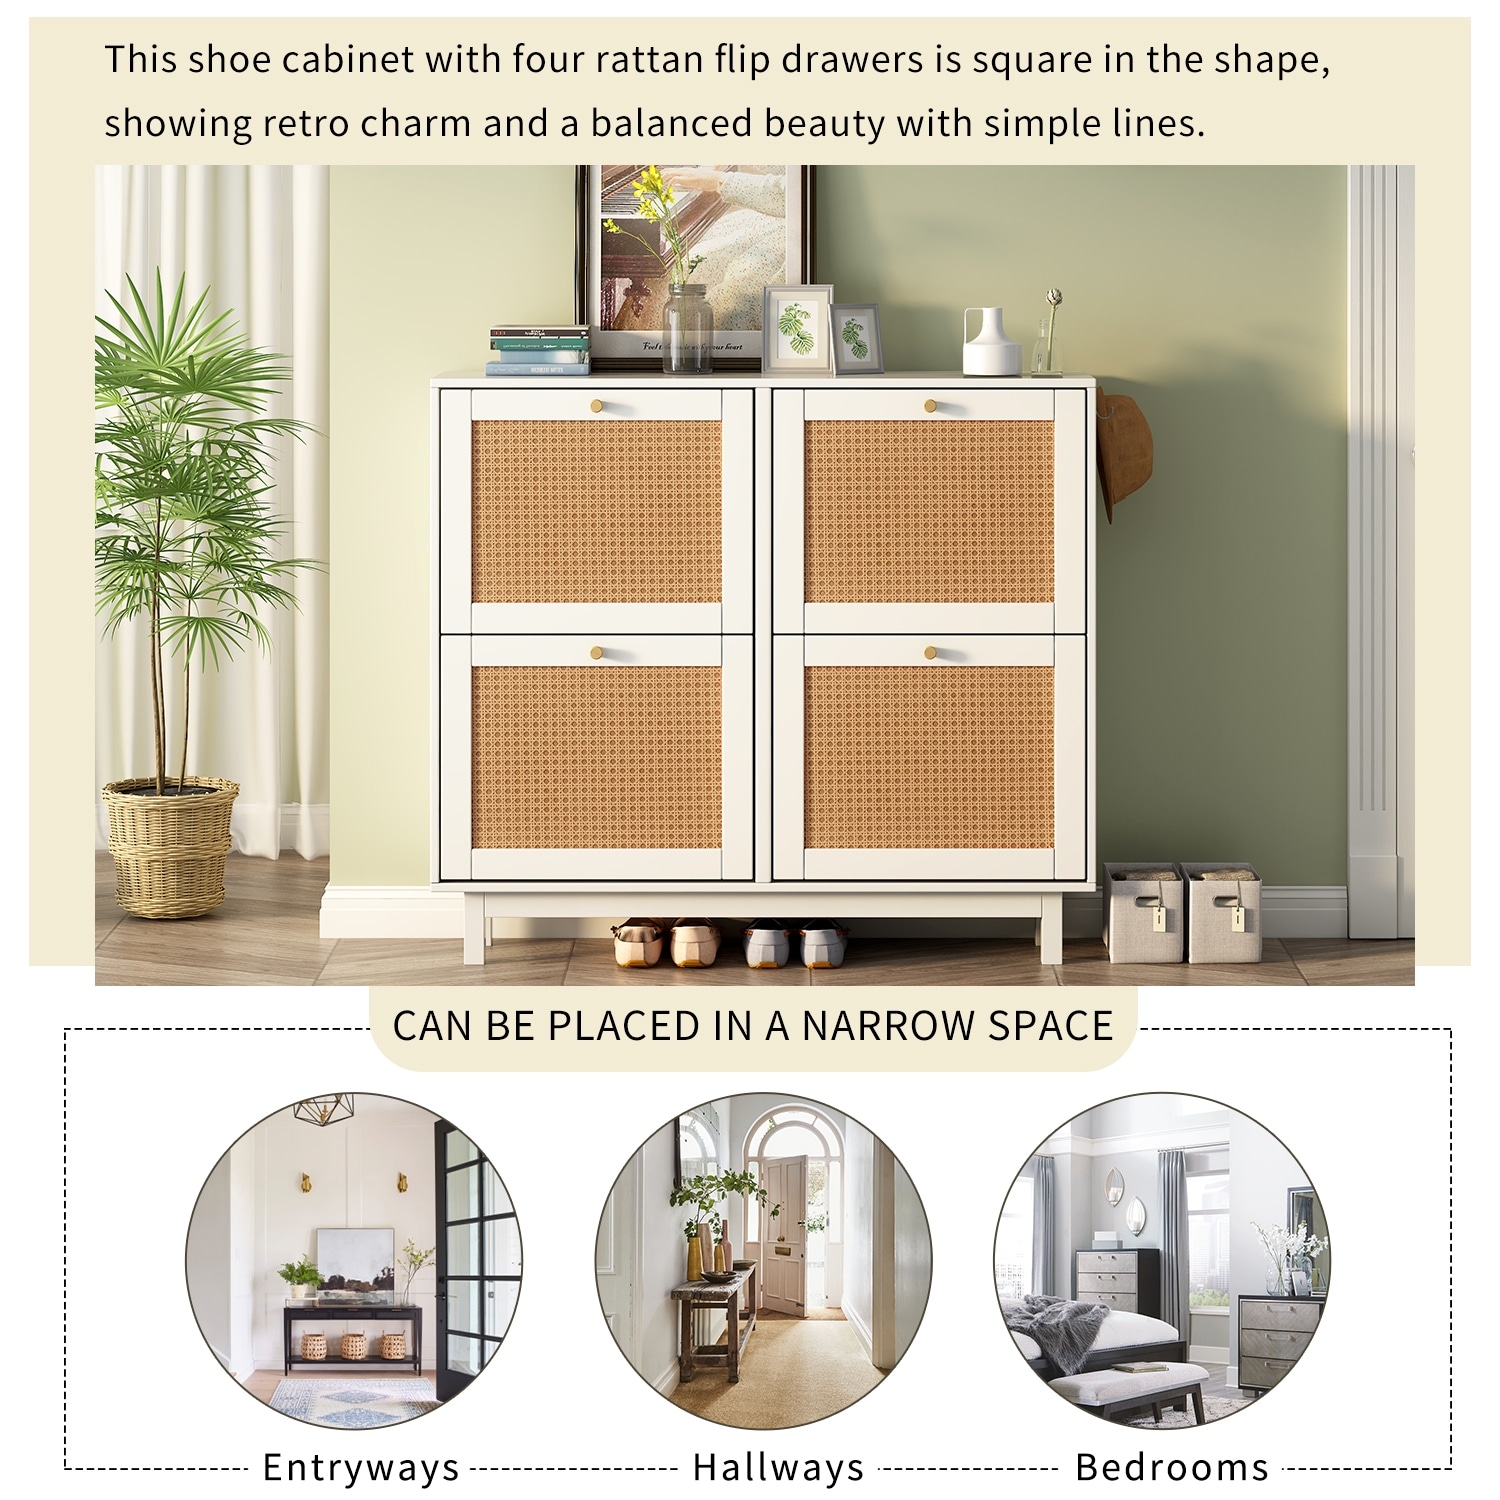 https://ak1.ostkcdn.com/images/products/is/images/direct/097428f0432e478ba2ccac1db3f842846194db9d/Rattan-Boho-Style-Shoe-Cabinet-with-4-Flip-Drawers%2C-2-Tier-Free-Standing-Shoe-Rack-with-Large-Space%2C-for-Entrance-Hallway.jpg